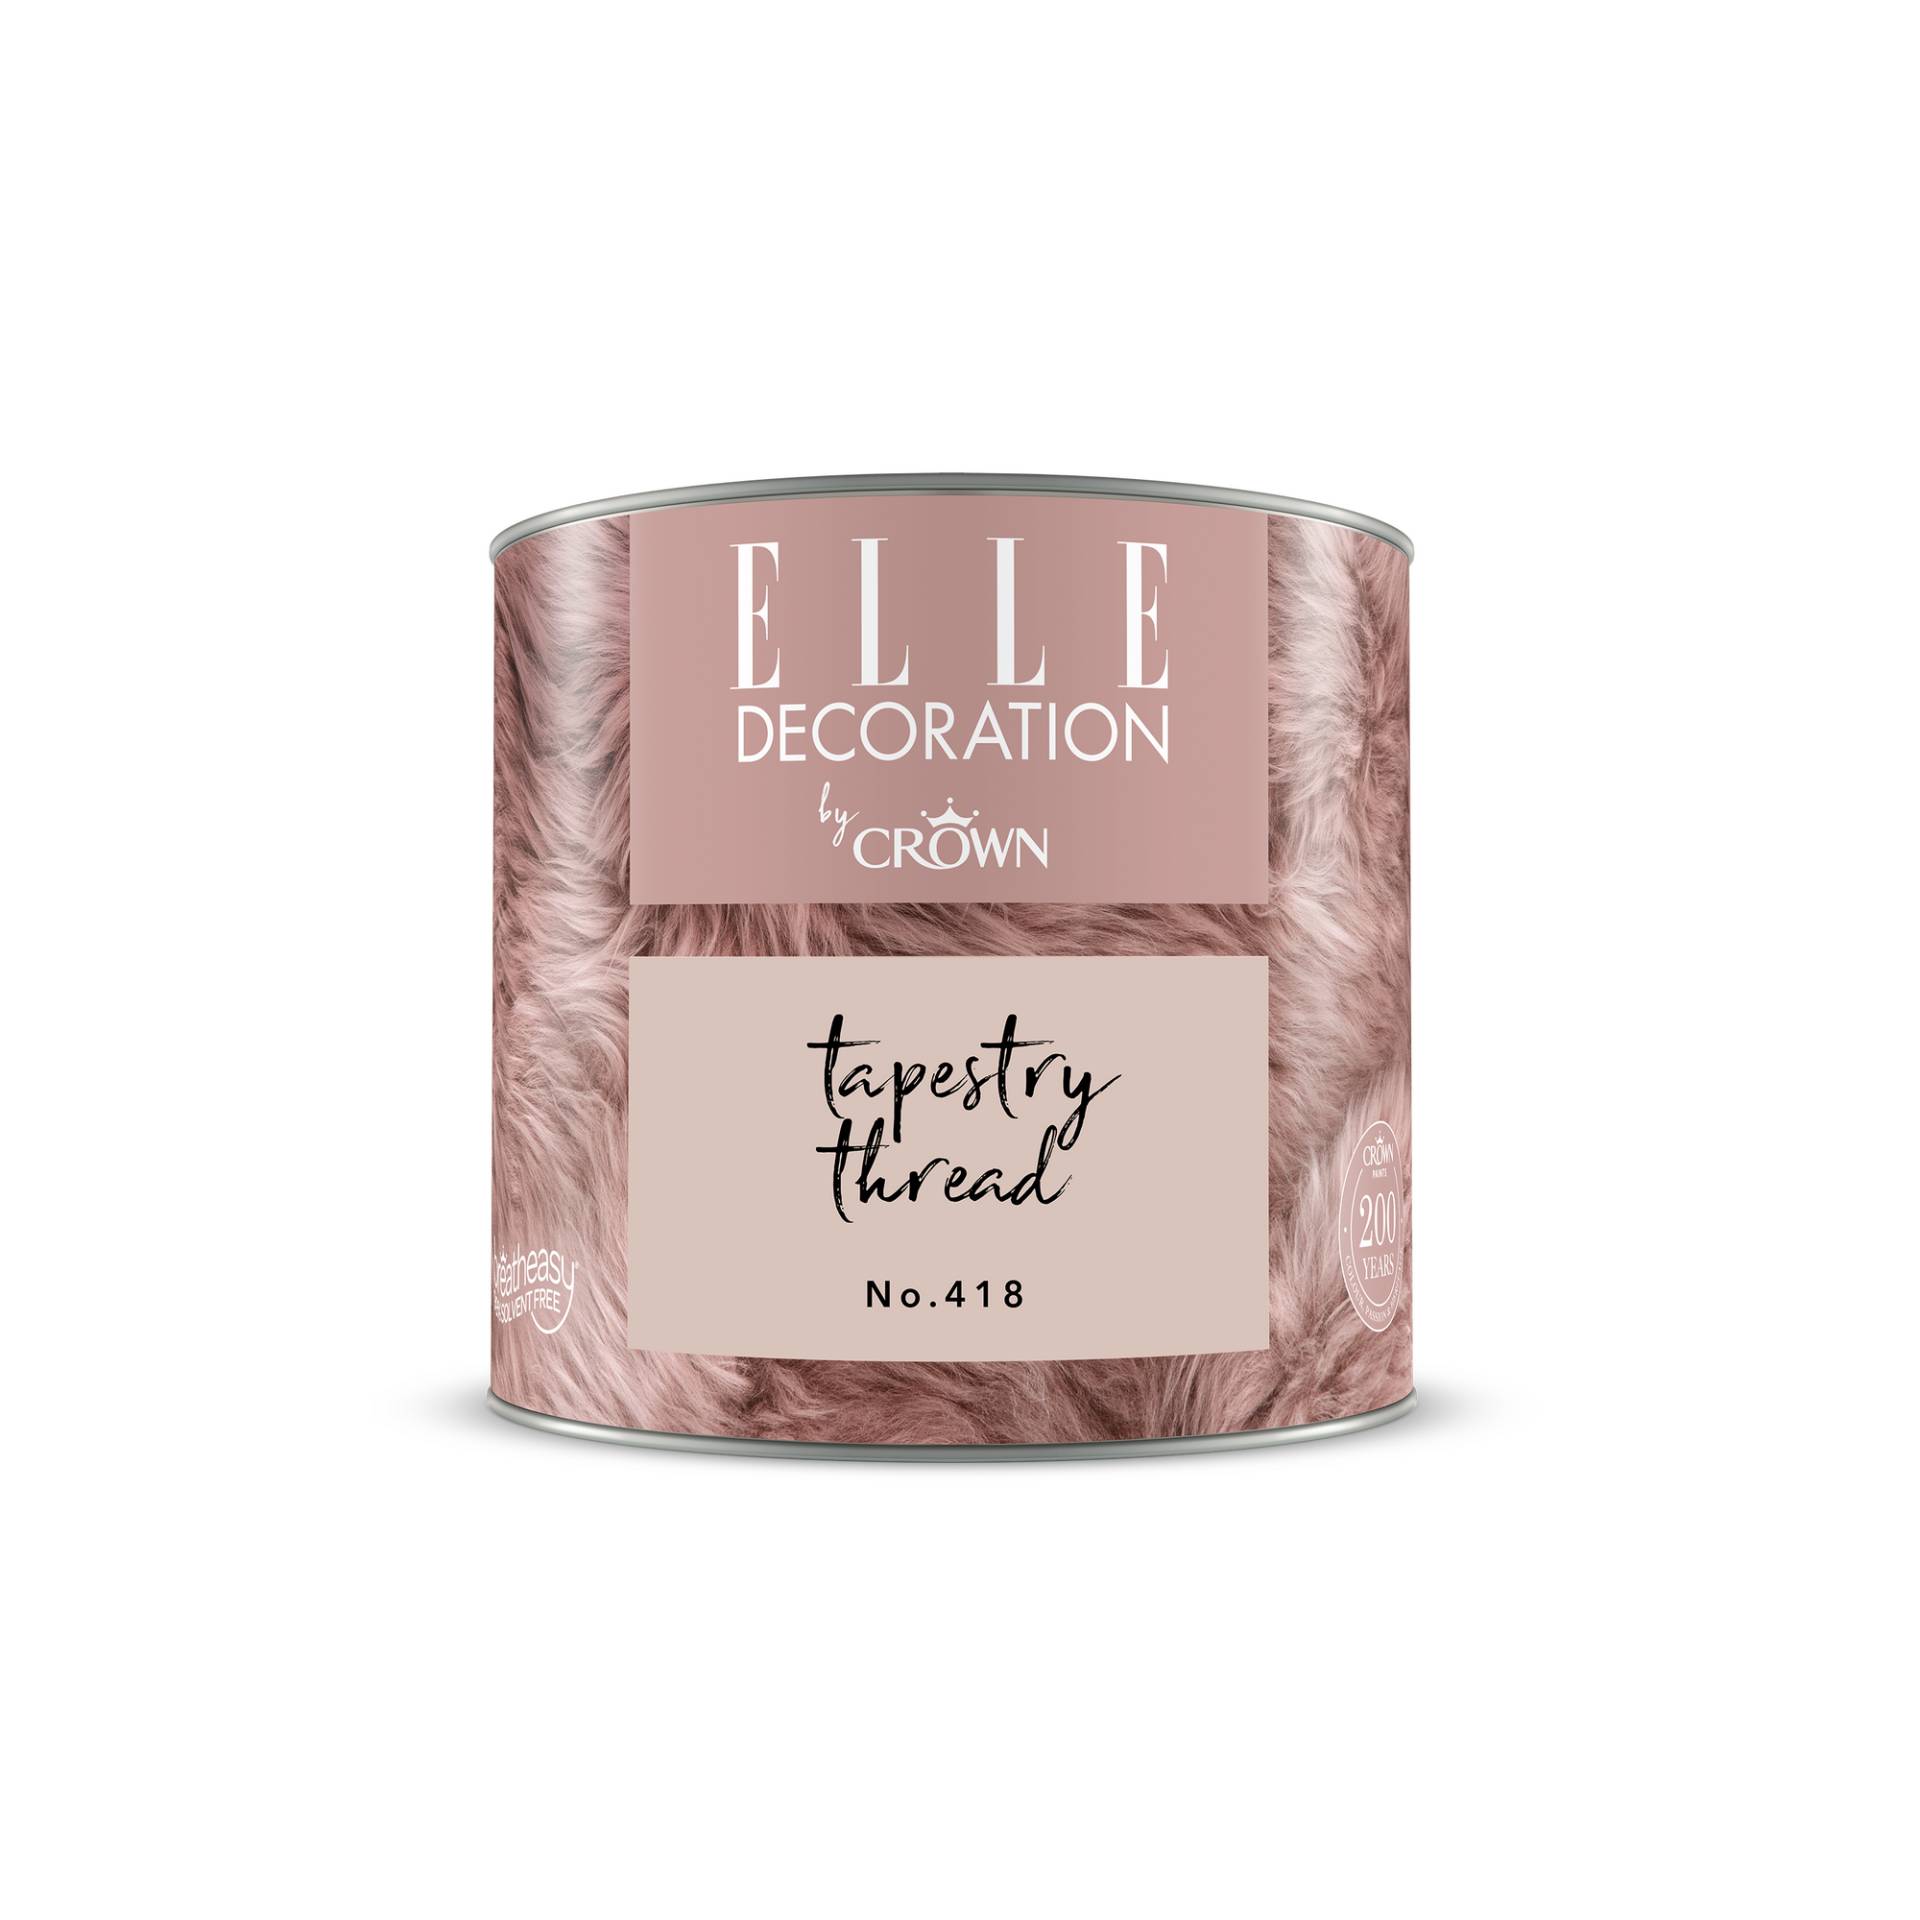 ELLE Decoration by Crown Wandfarbe 'Tapestry Thread No. 418' rosa matt 125 ml von ELLE Decoration by Crown